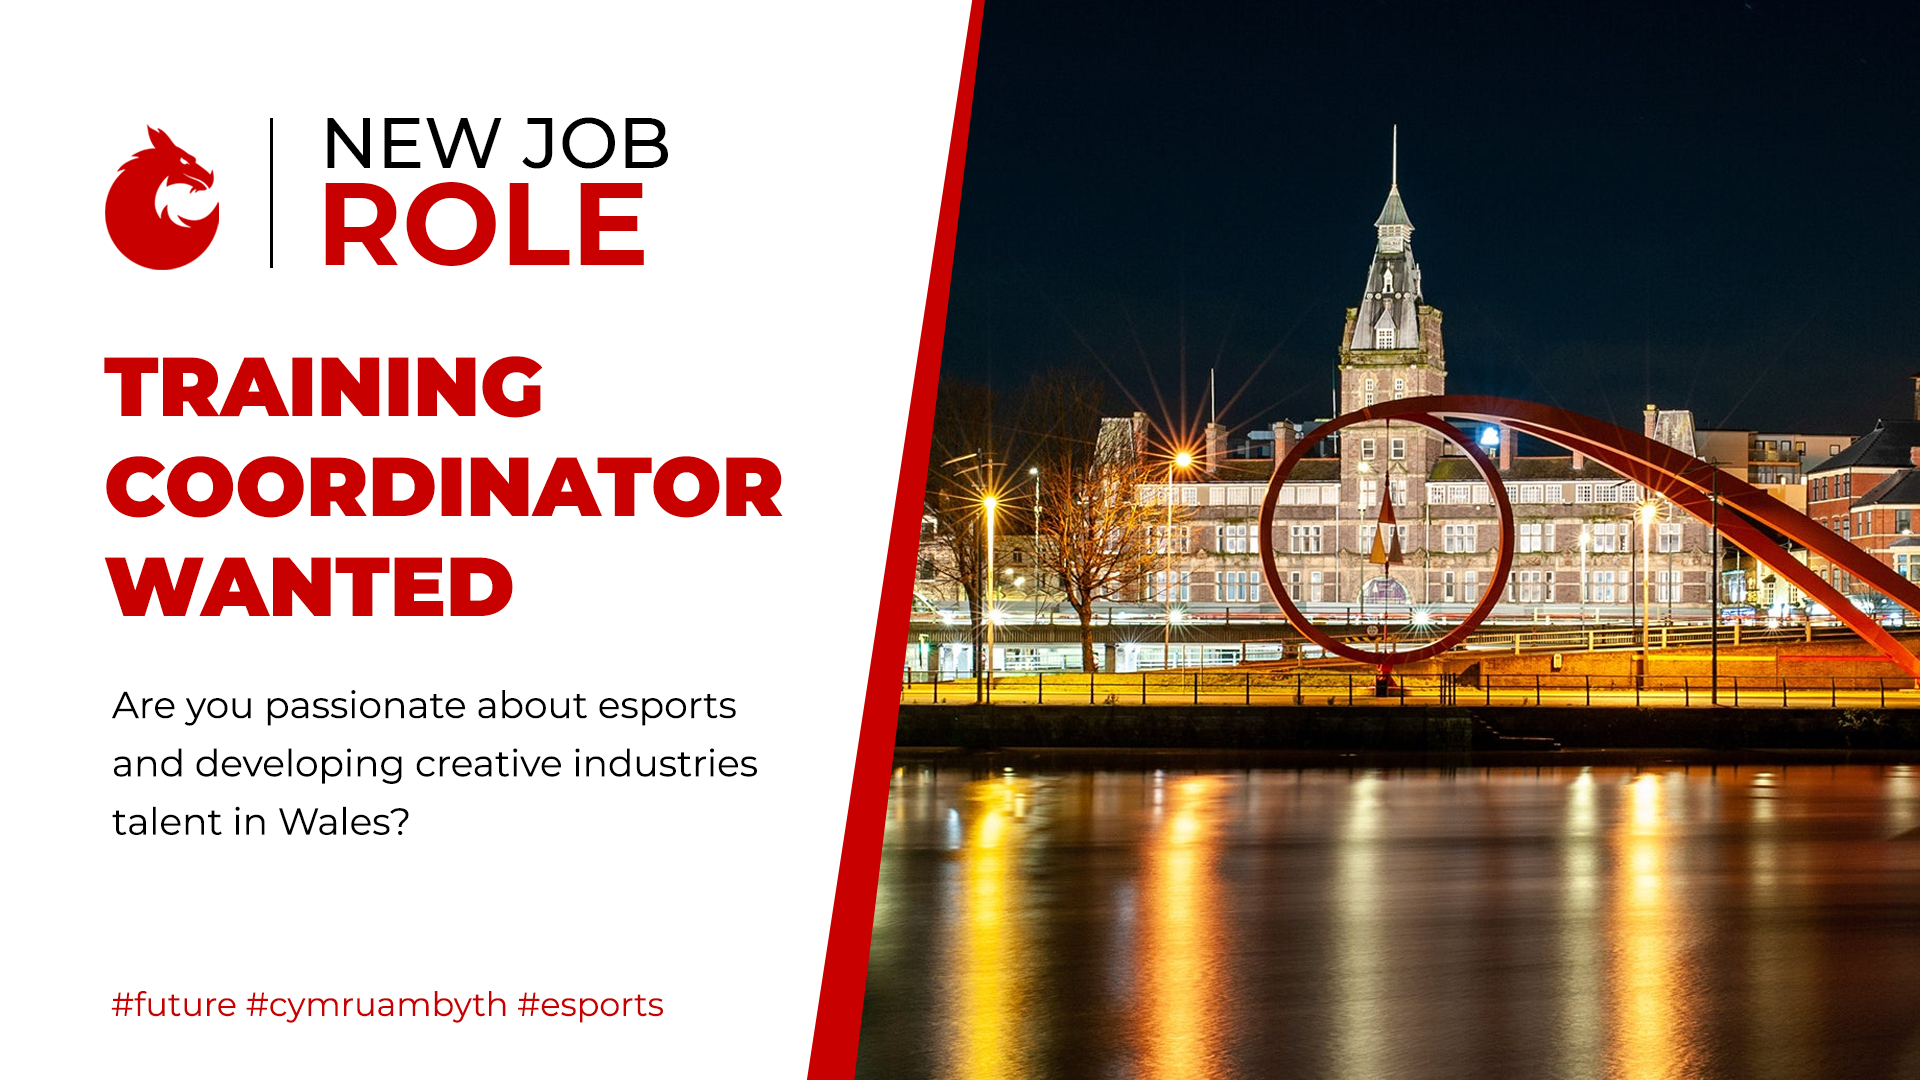 We’re recruiting for a Training Coordinator in Newport